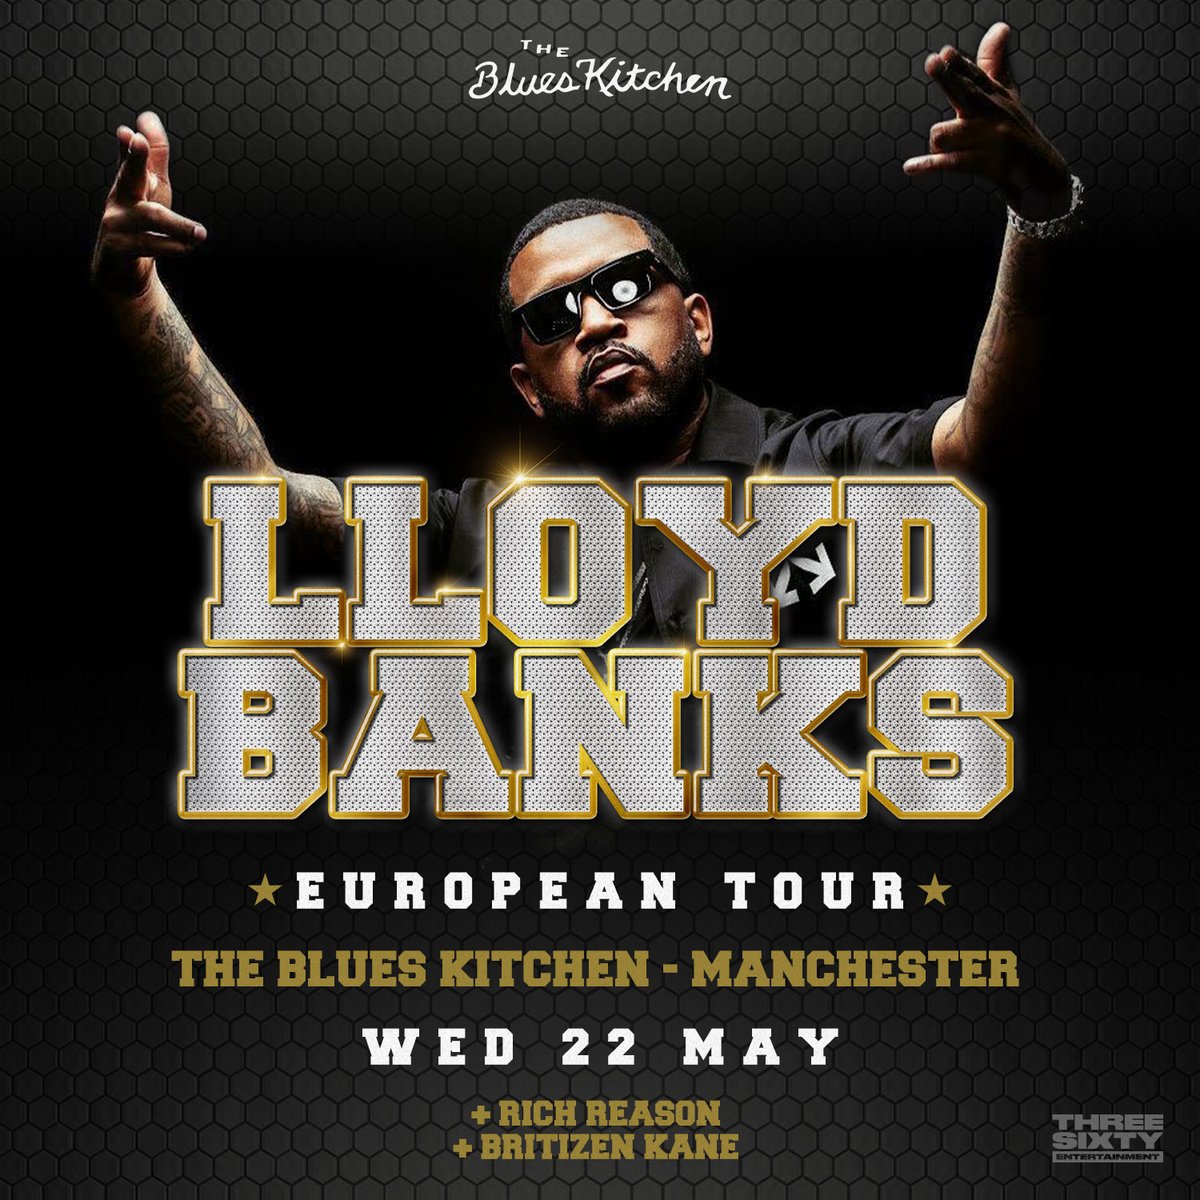 GASSED to announce I will be supporting @Lloydbanks at @TheBluesKitchen Manchester on Wednesday 22nd May 🤯 tickets available now 🎟️ new music incoming before then also 👀